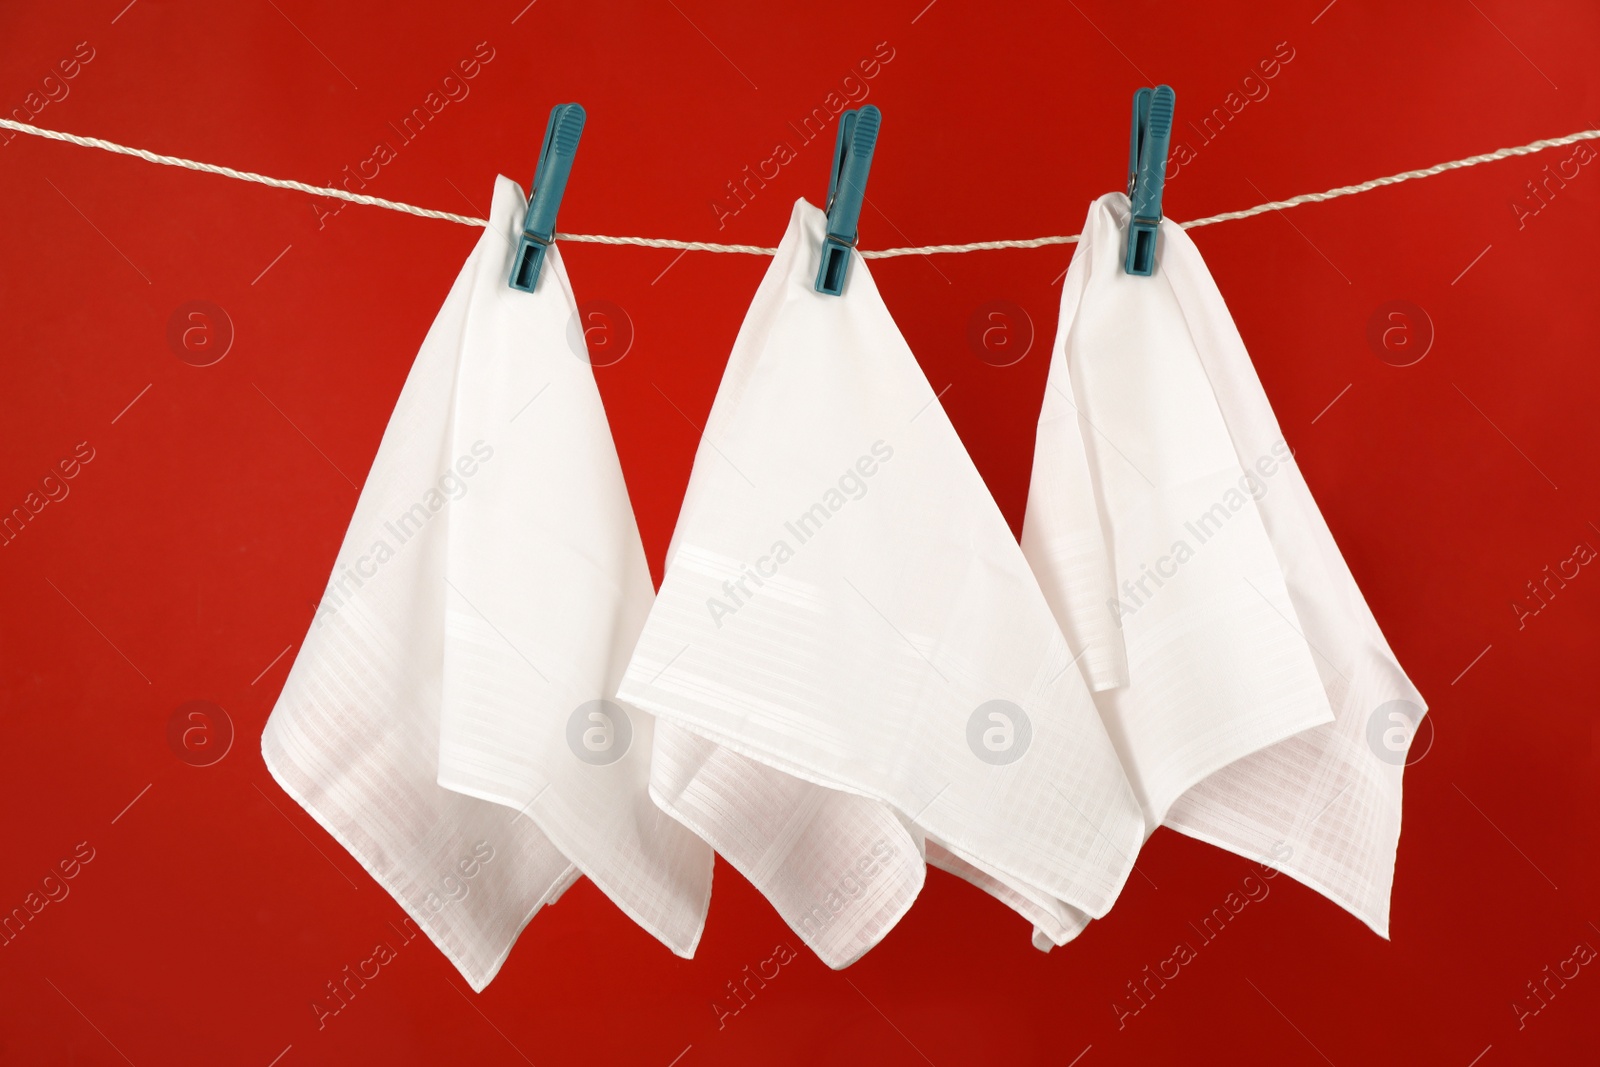 Photo of Three handkerchiefs hanging on rope against red background